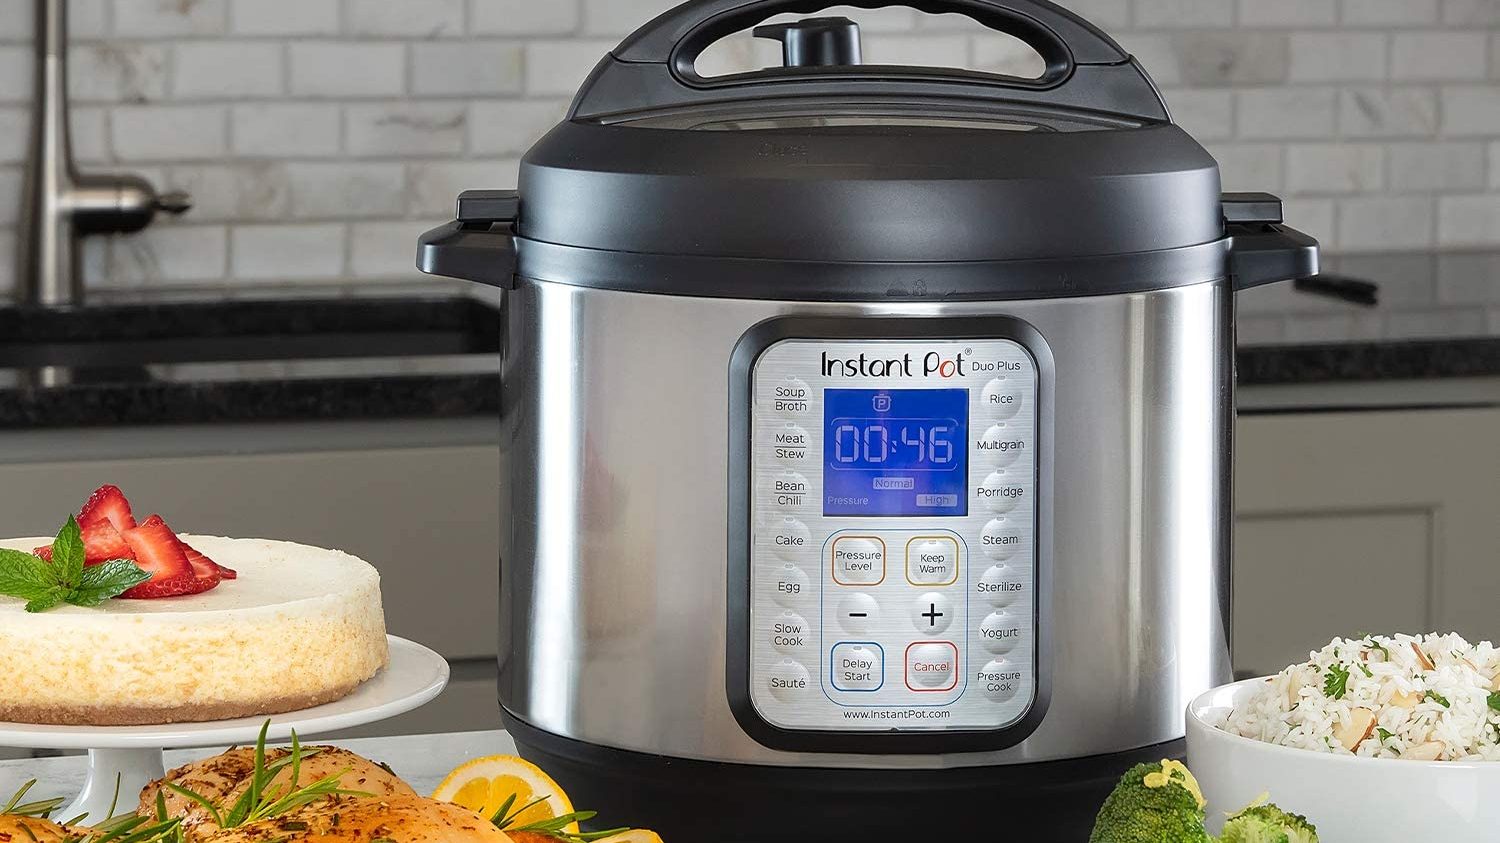 Black Friday 2020 Instant Pot Deals are available right now at Amazon – BGR